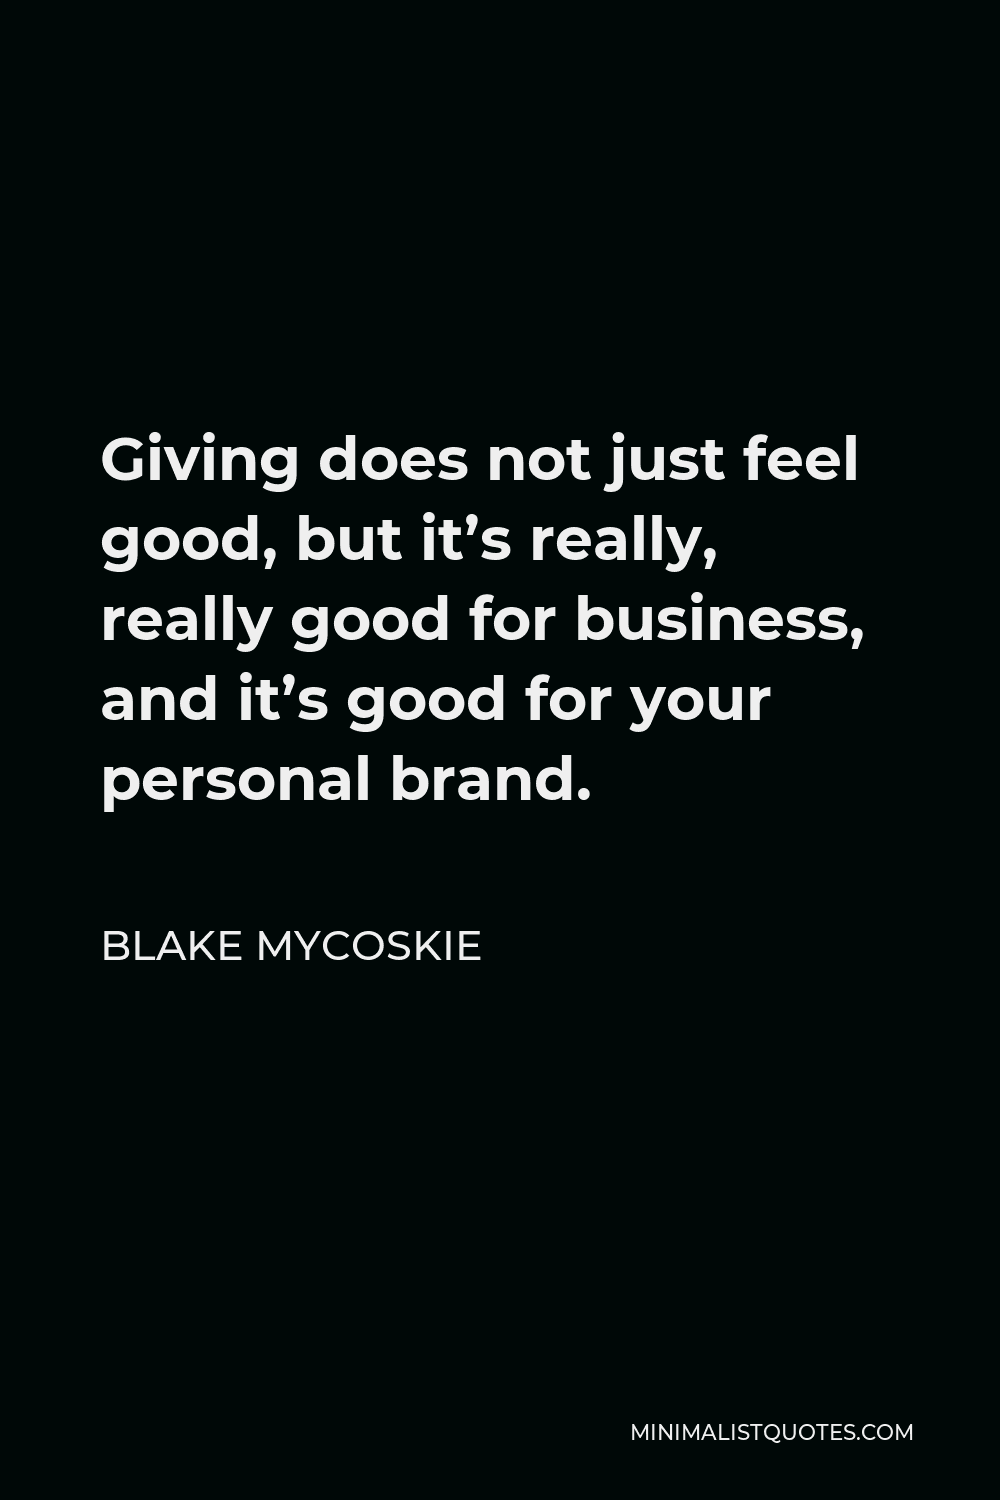 Blake Mycoskie Quote - Giving does not just feel good, but it’s really, really good for business, and it’s good for your personal brand.